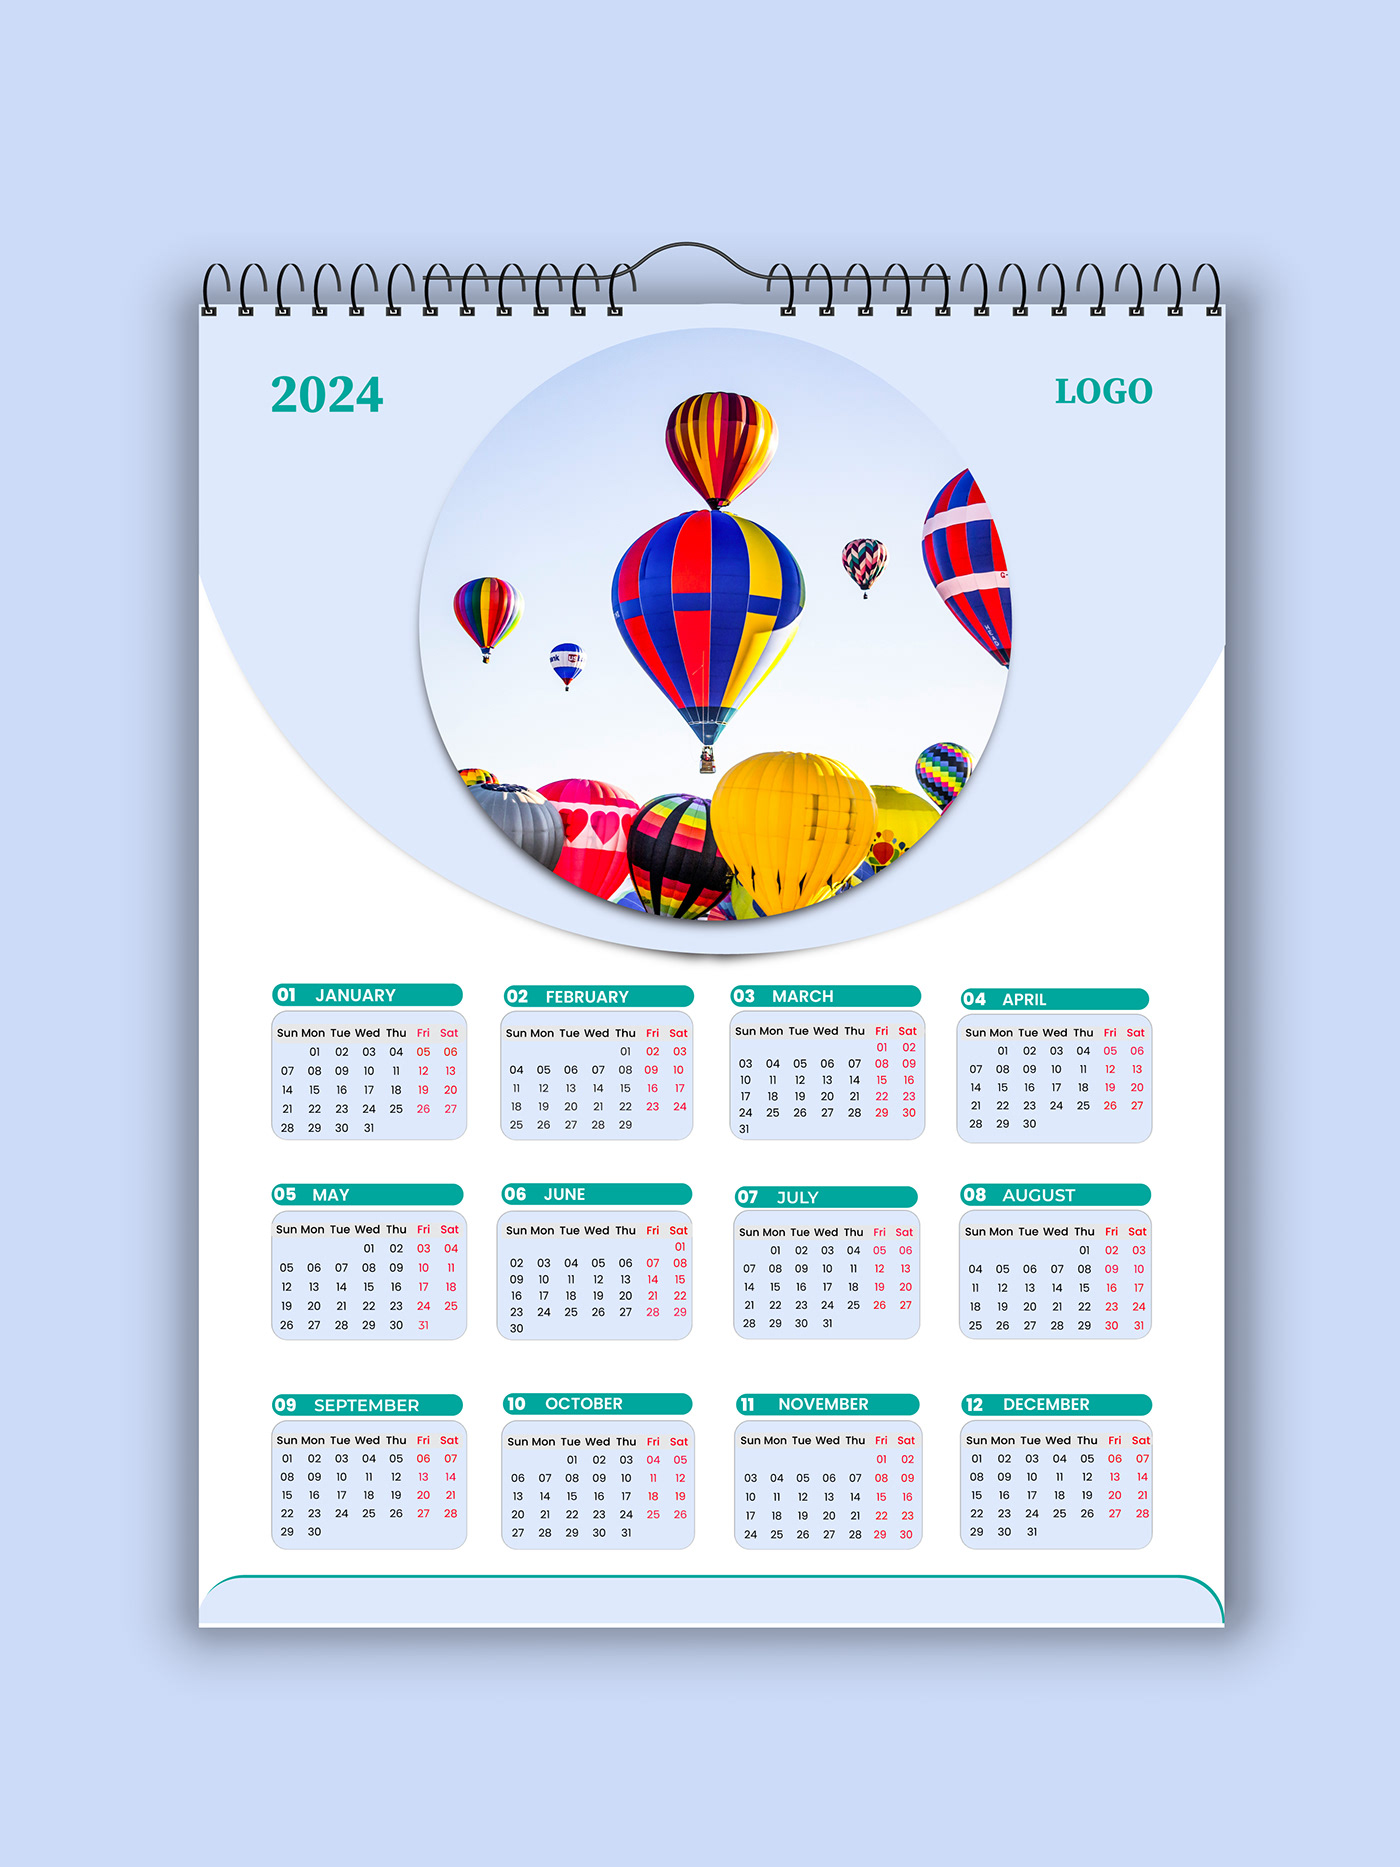 design calendar 2024 calendar calendar design Calender 2024design 2024 calendar design wall calender Calendar Template wall